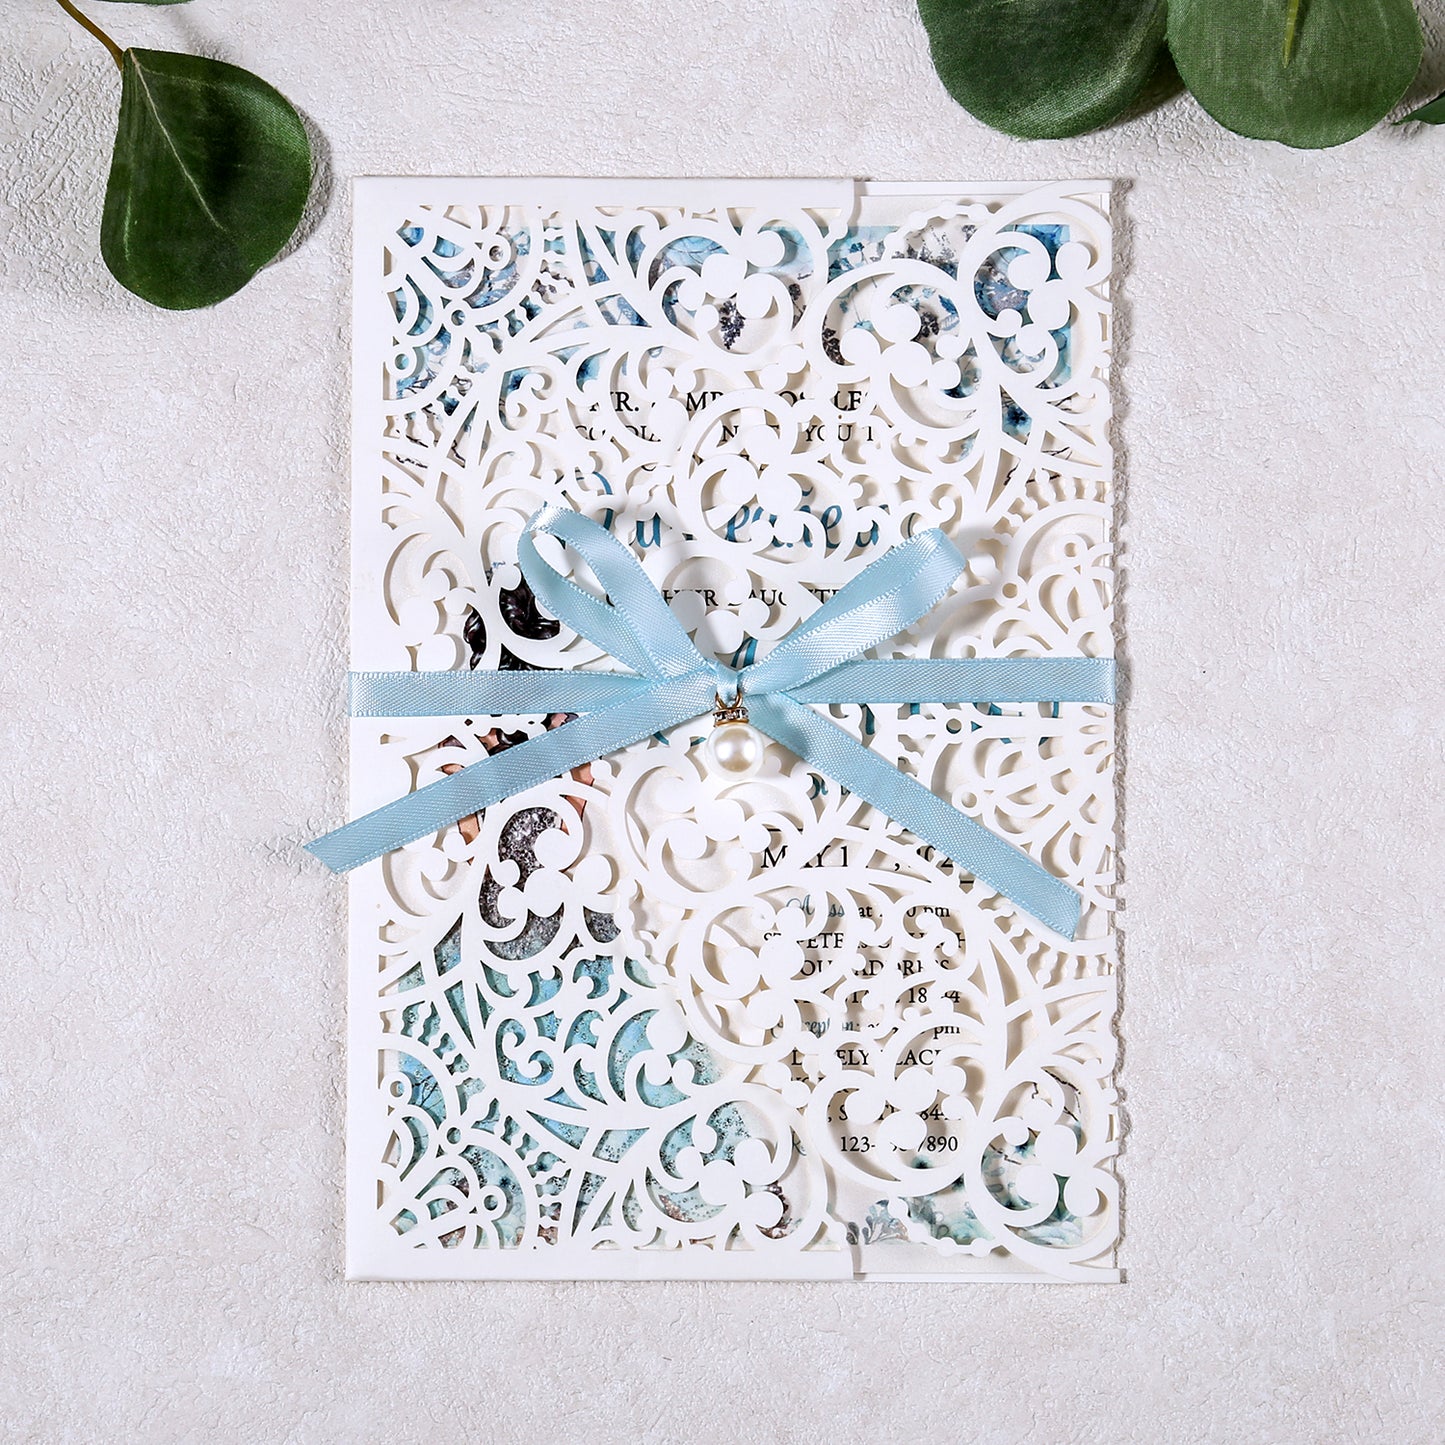 5 X 7.2" Laser Cut Hollow Rose Wedding invitations Cards With Blue Ribbon And Envelopes For Quinceanera Sweet 15 Invite - DorisHome